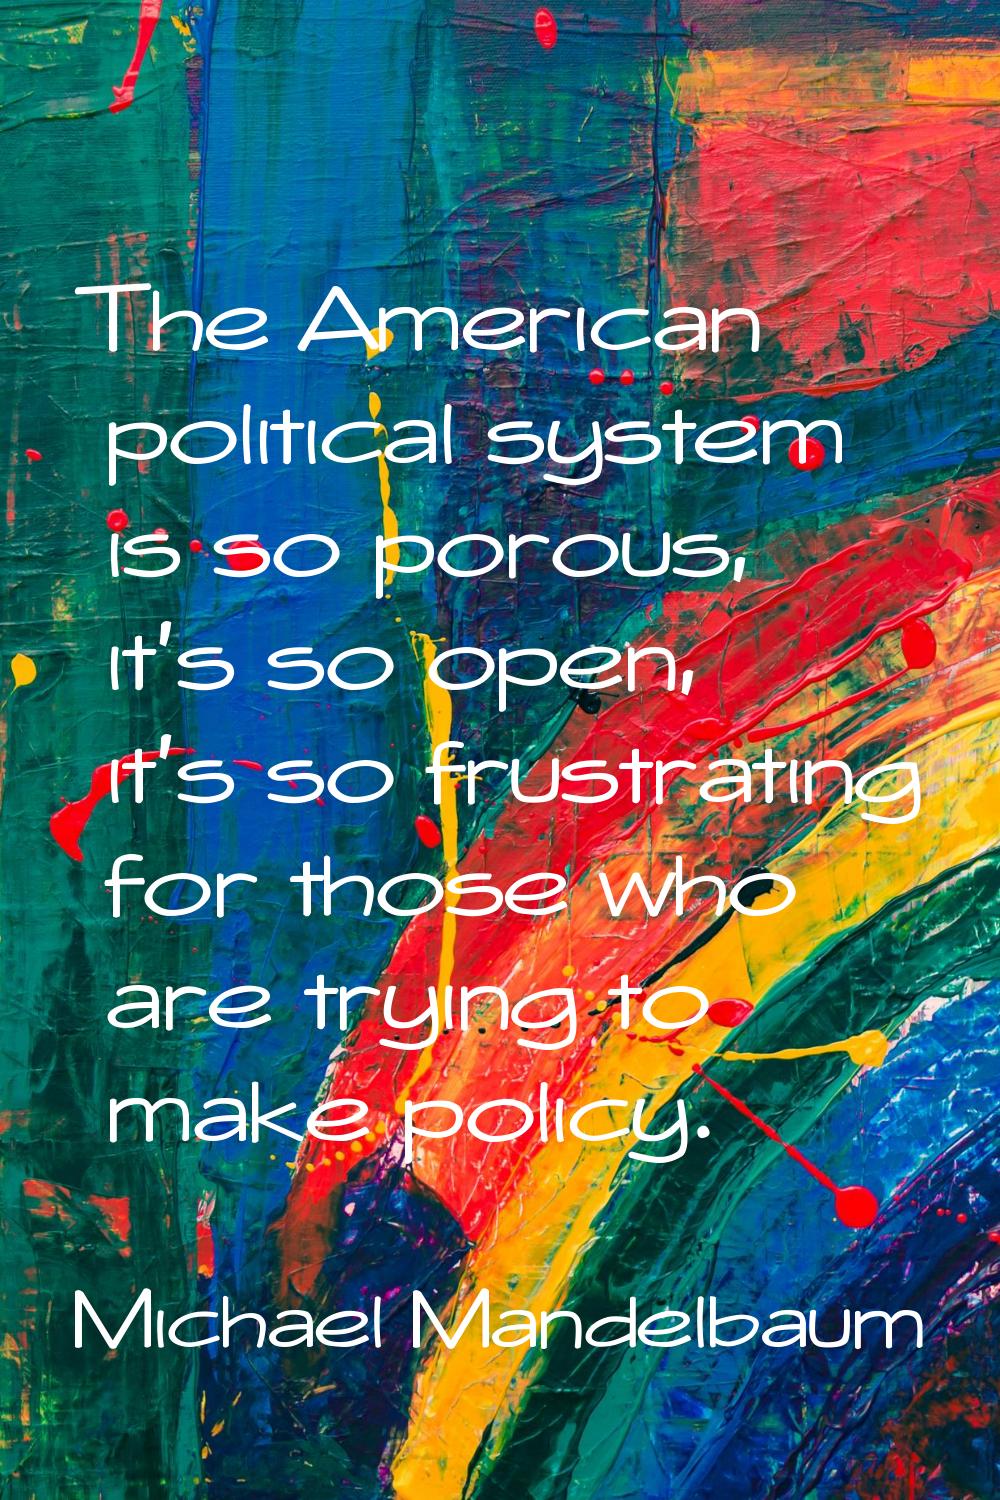 The American political system is so porous, it's so open, it's so frustrating for those who are try